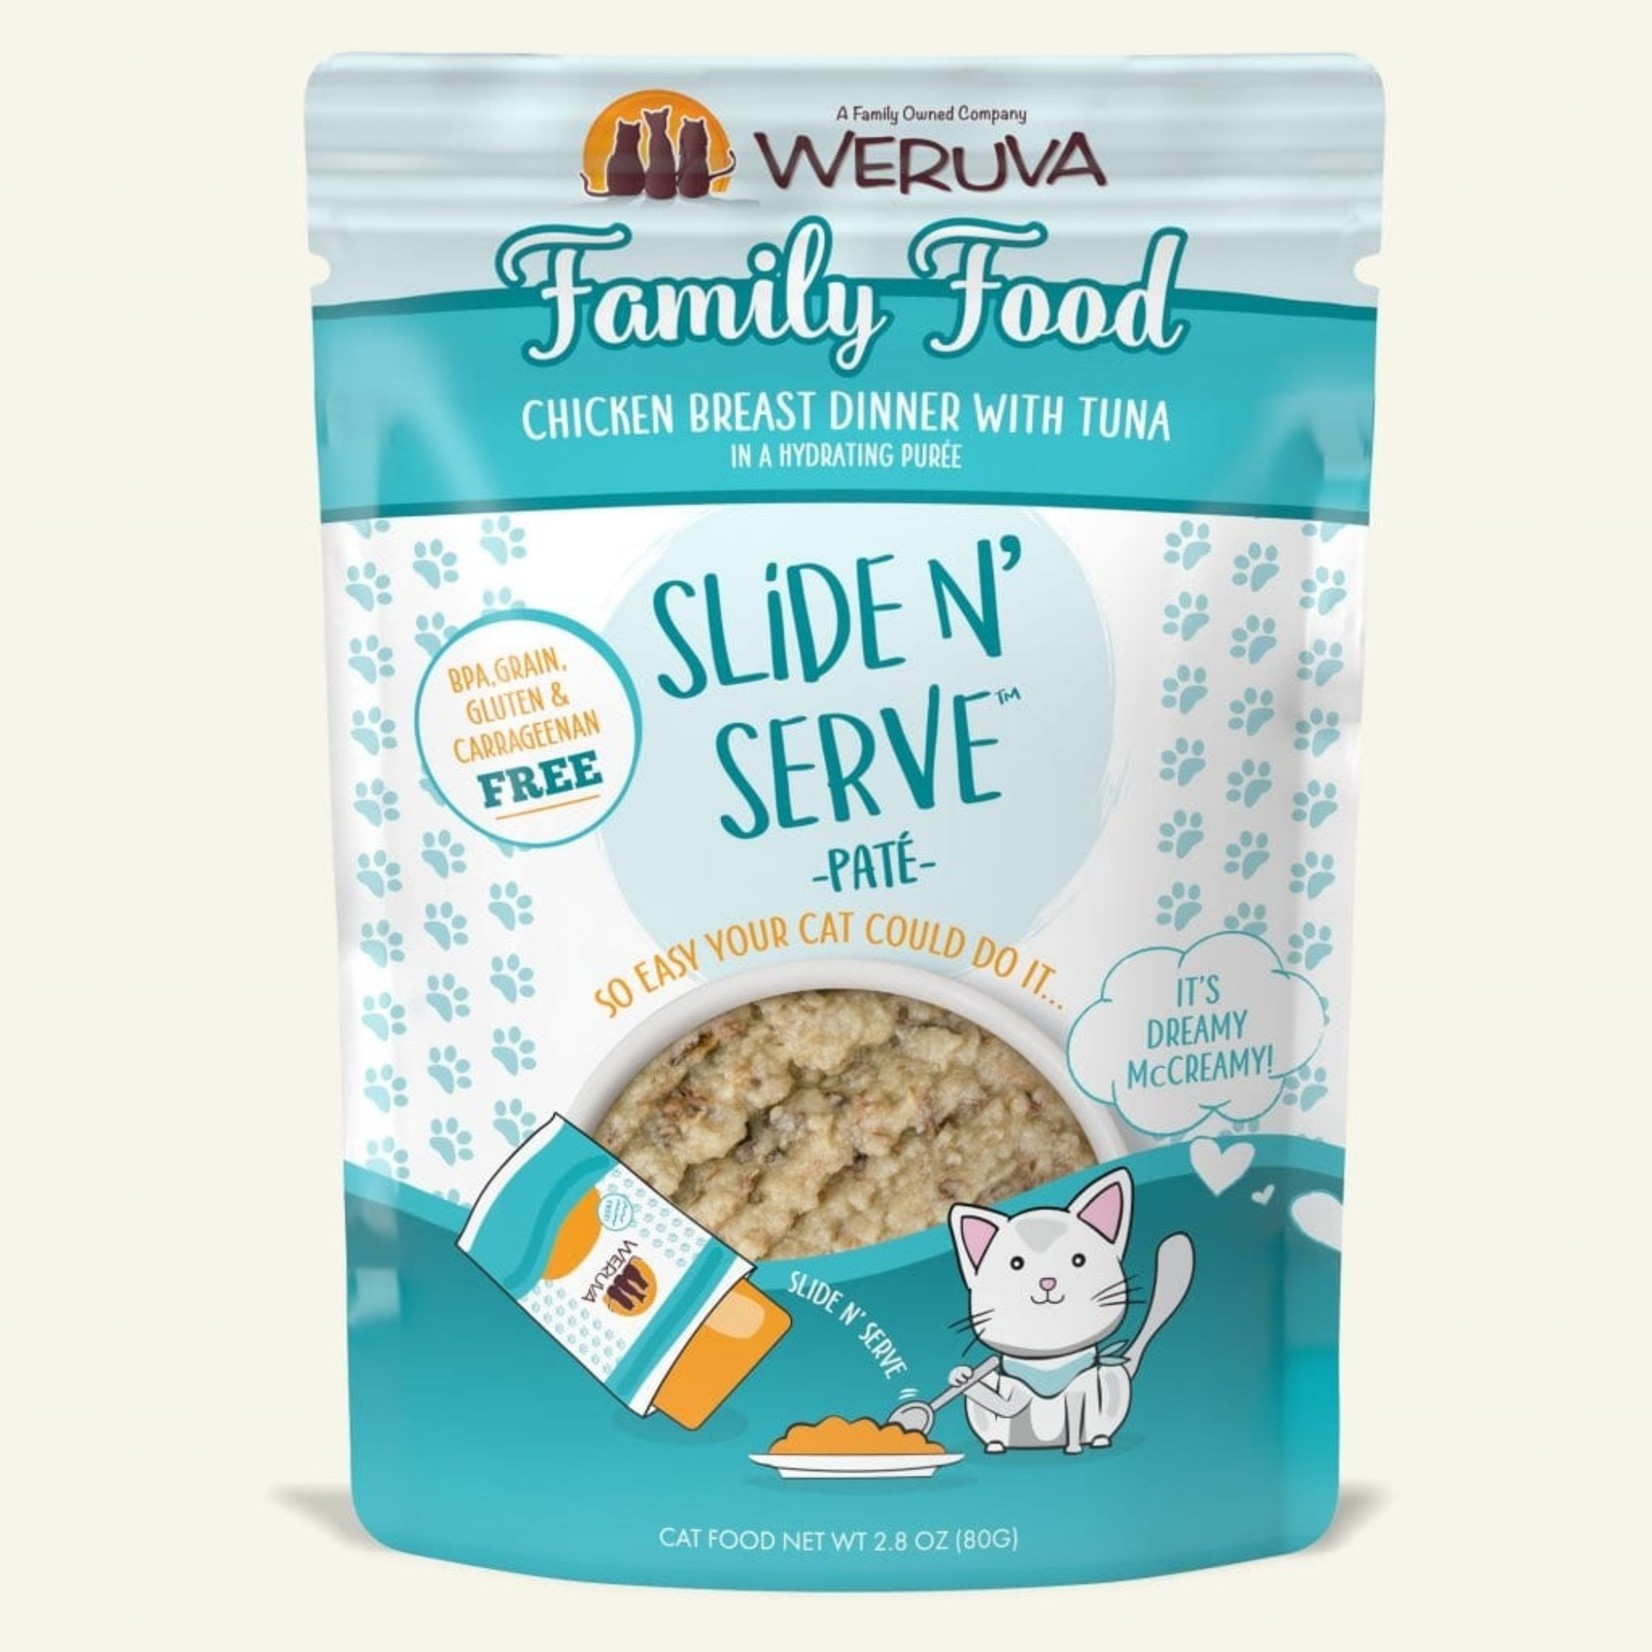 Weruva Weruva Wet Cat Food Slide & Serve Pate Family Food Chicken Breast Dinner with Tuna in a Hydrating Puree 2.8oz Pouch